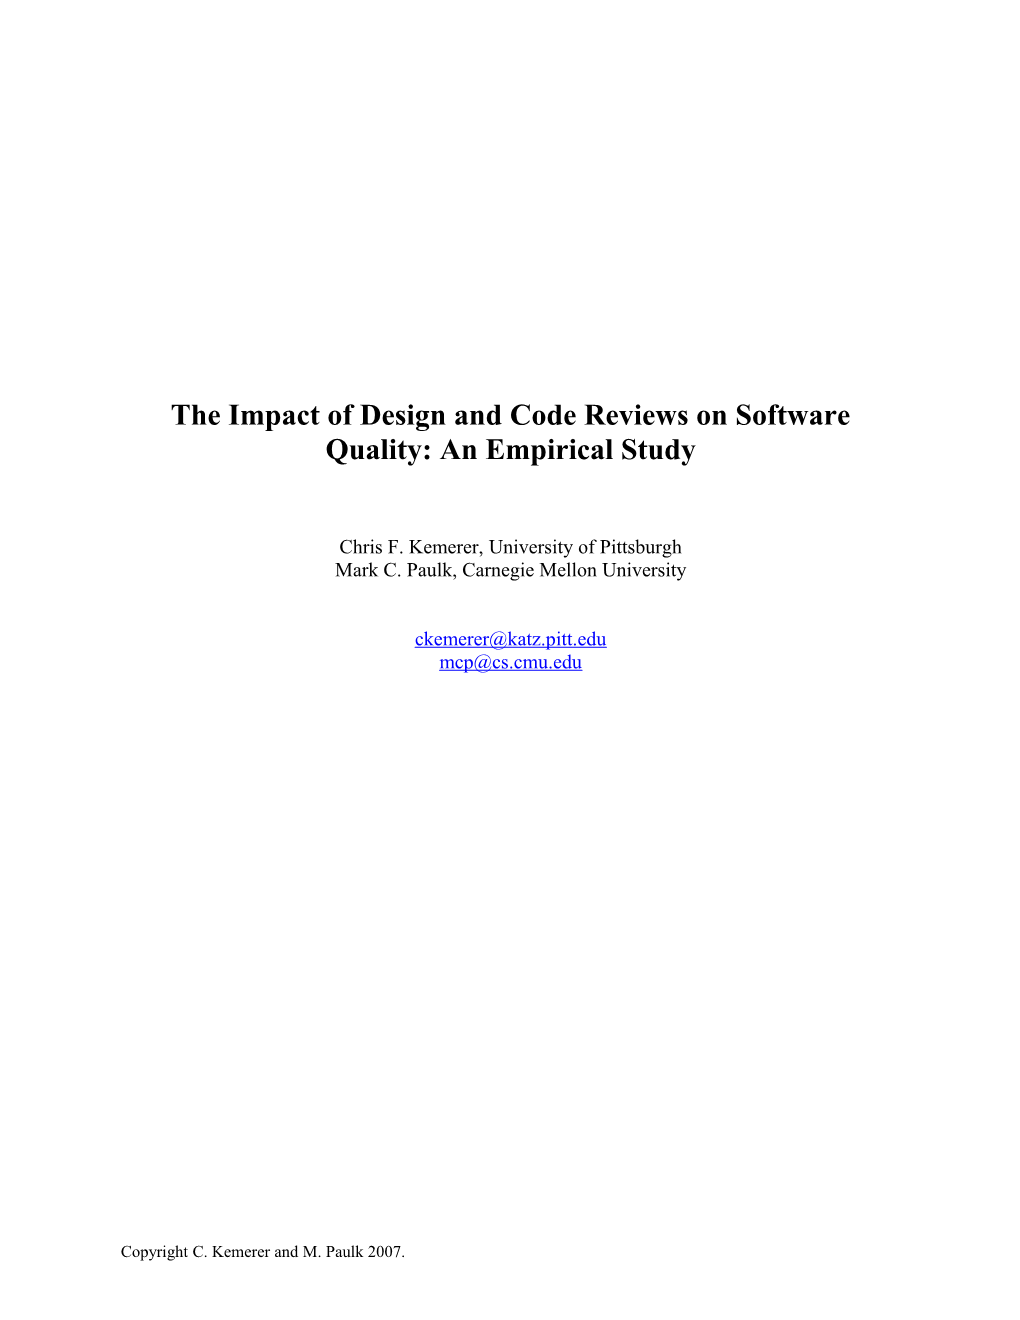 The Impact of Design and Code Reviews on Software Quality: an Empirical Study